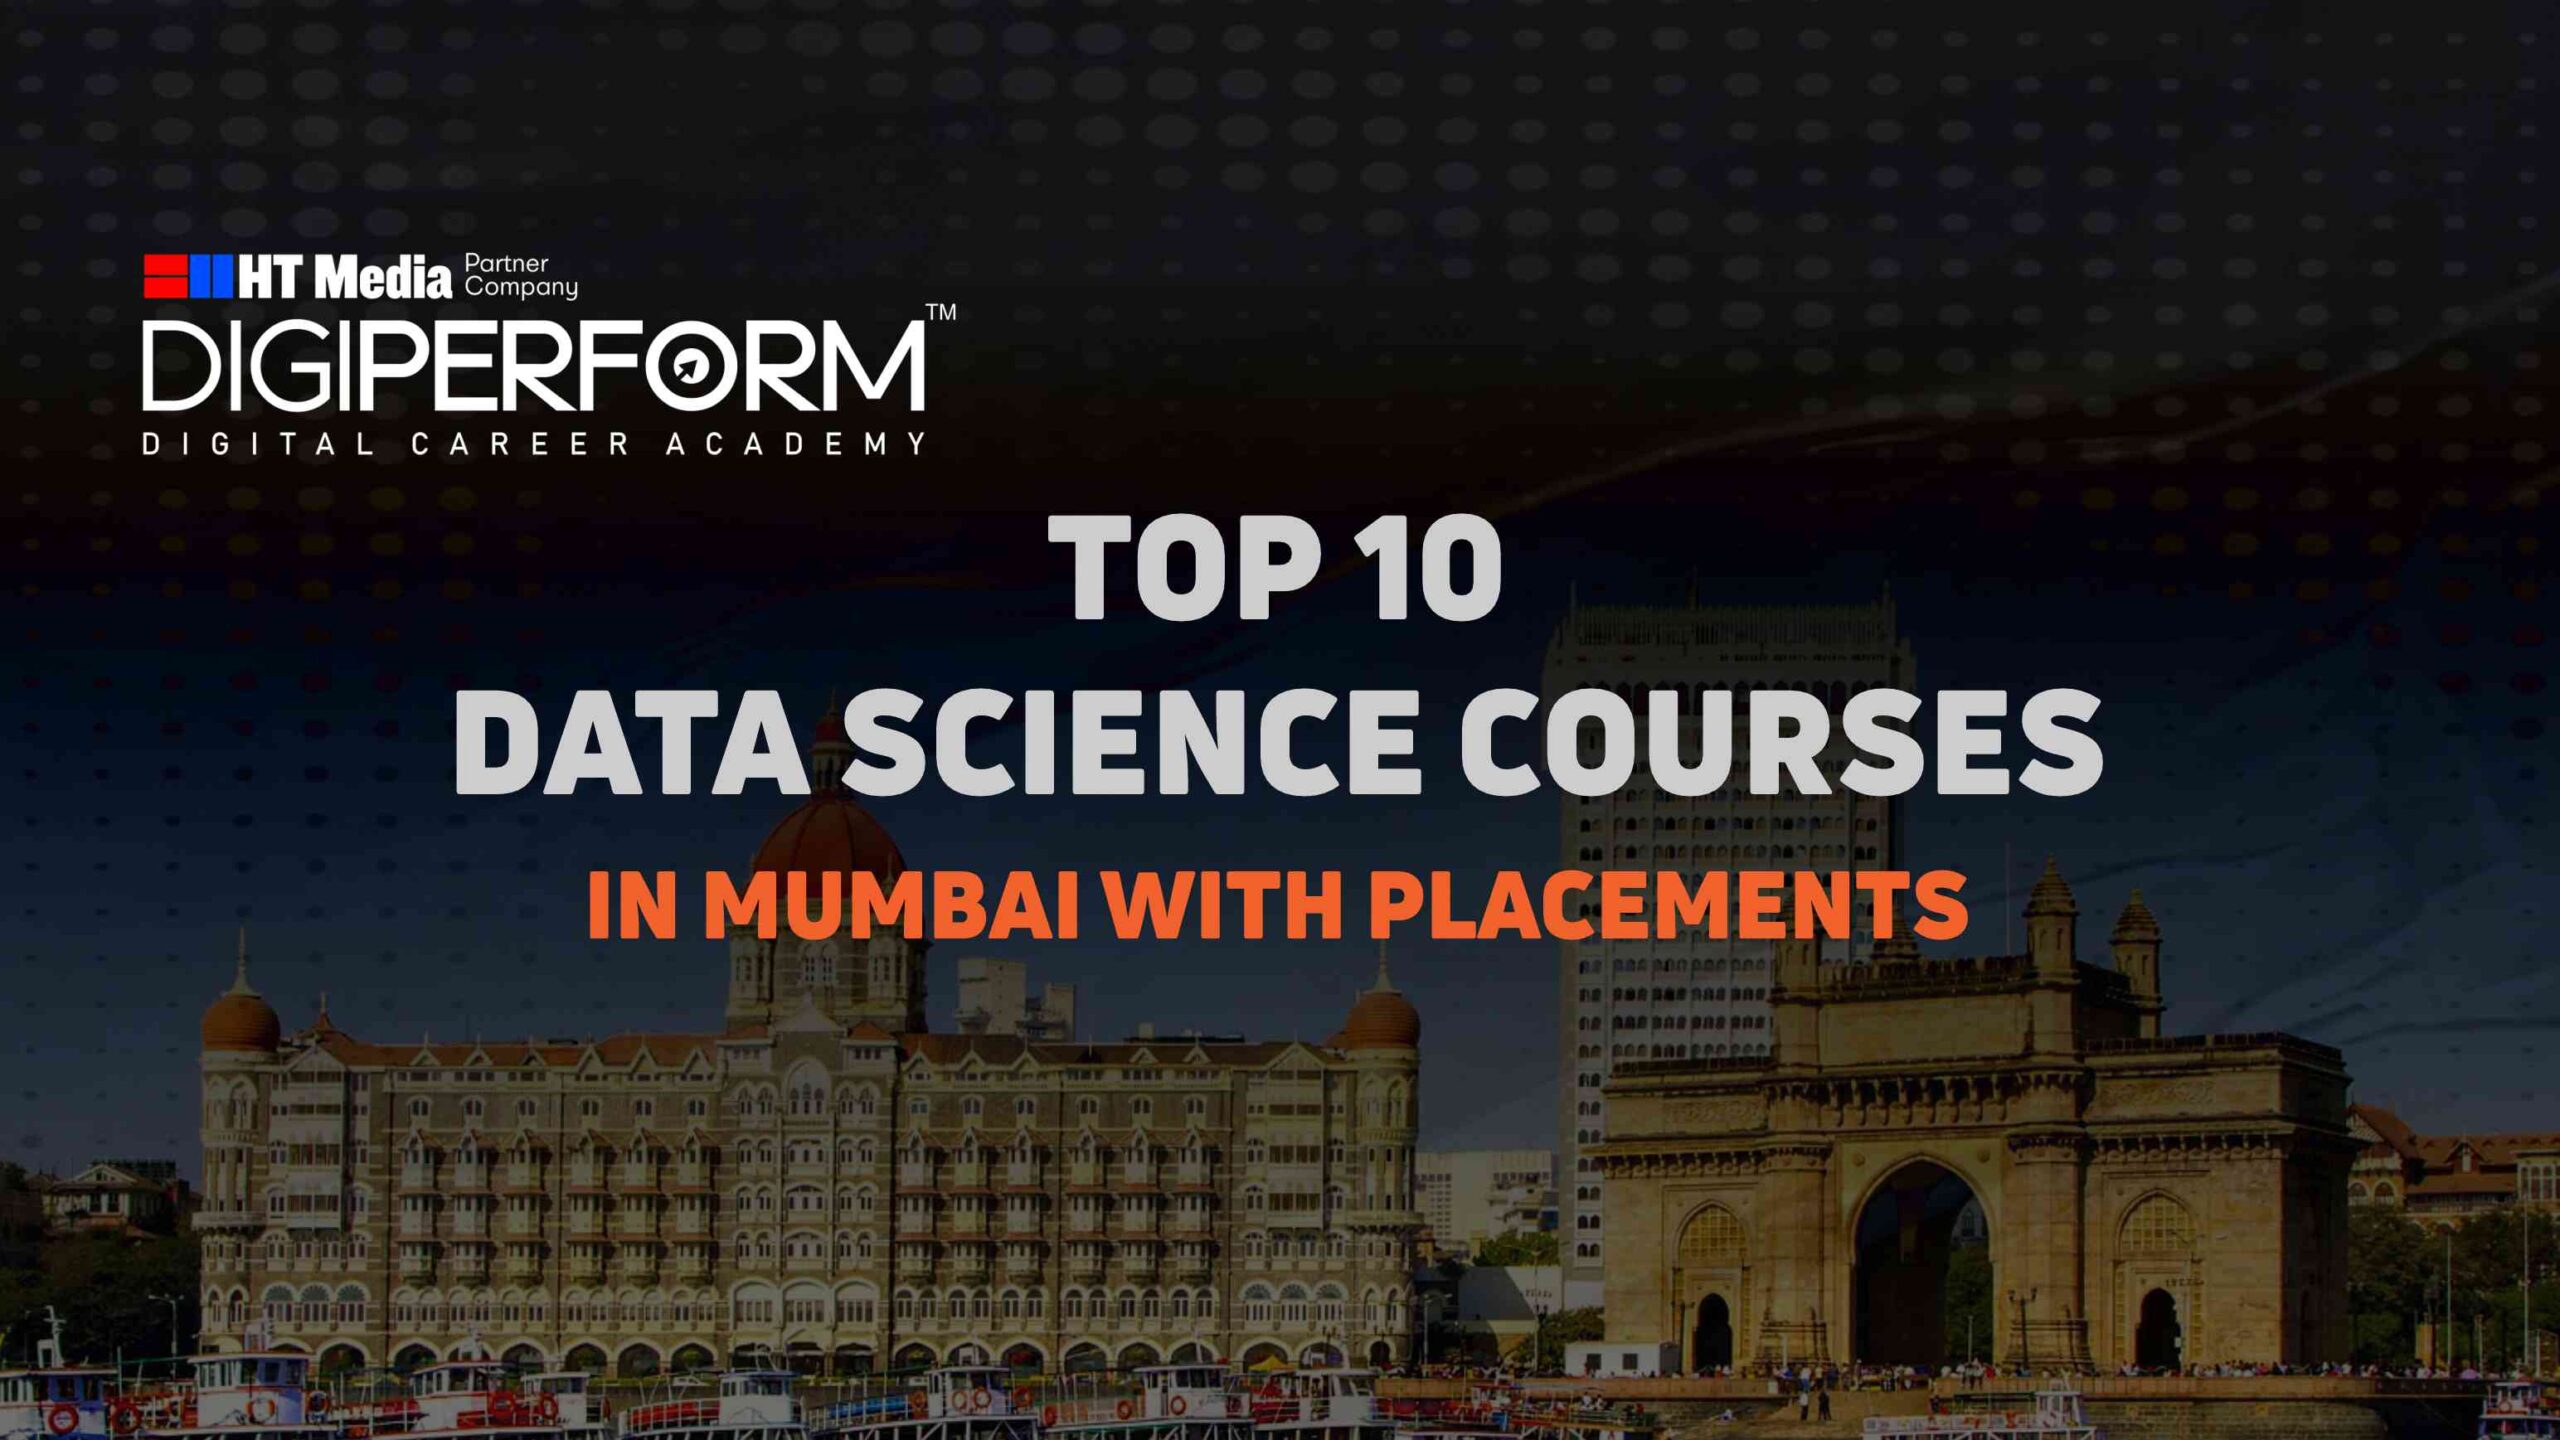 Top 10 Data Science Courses in Mumbai with Placements